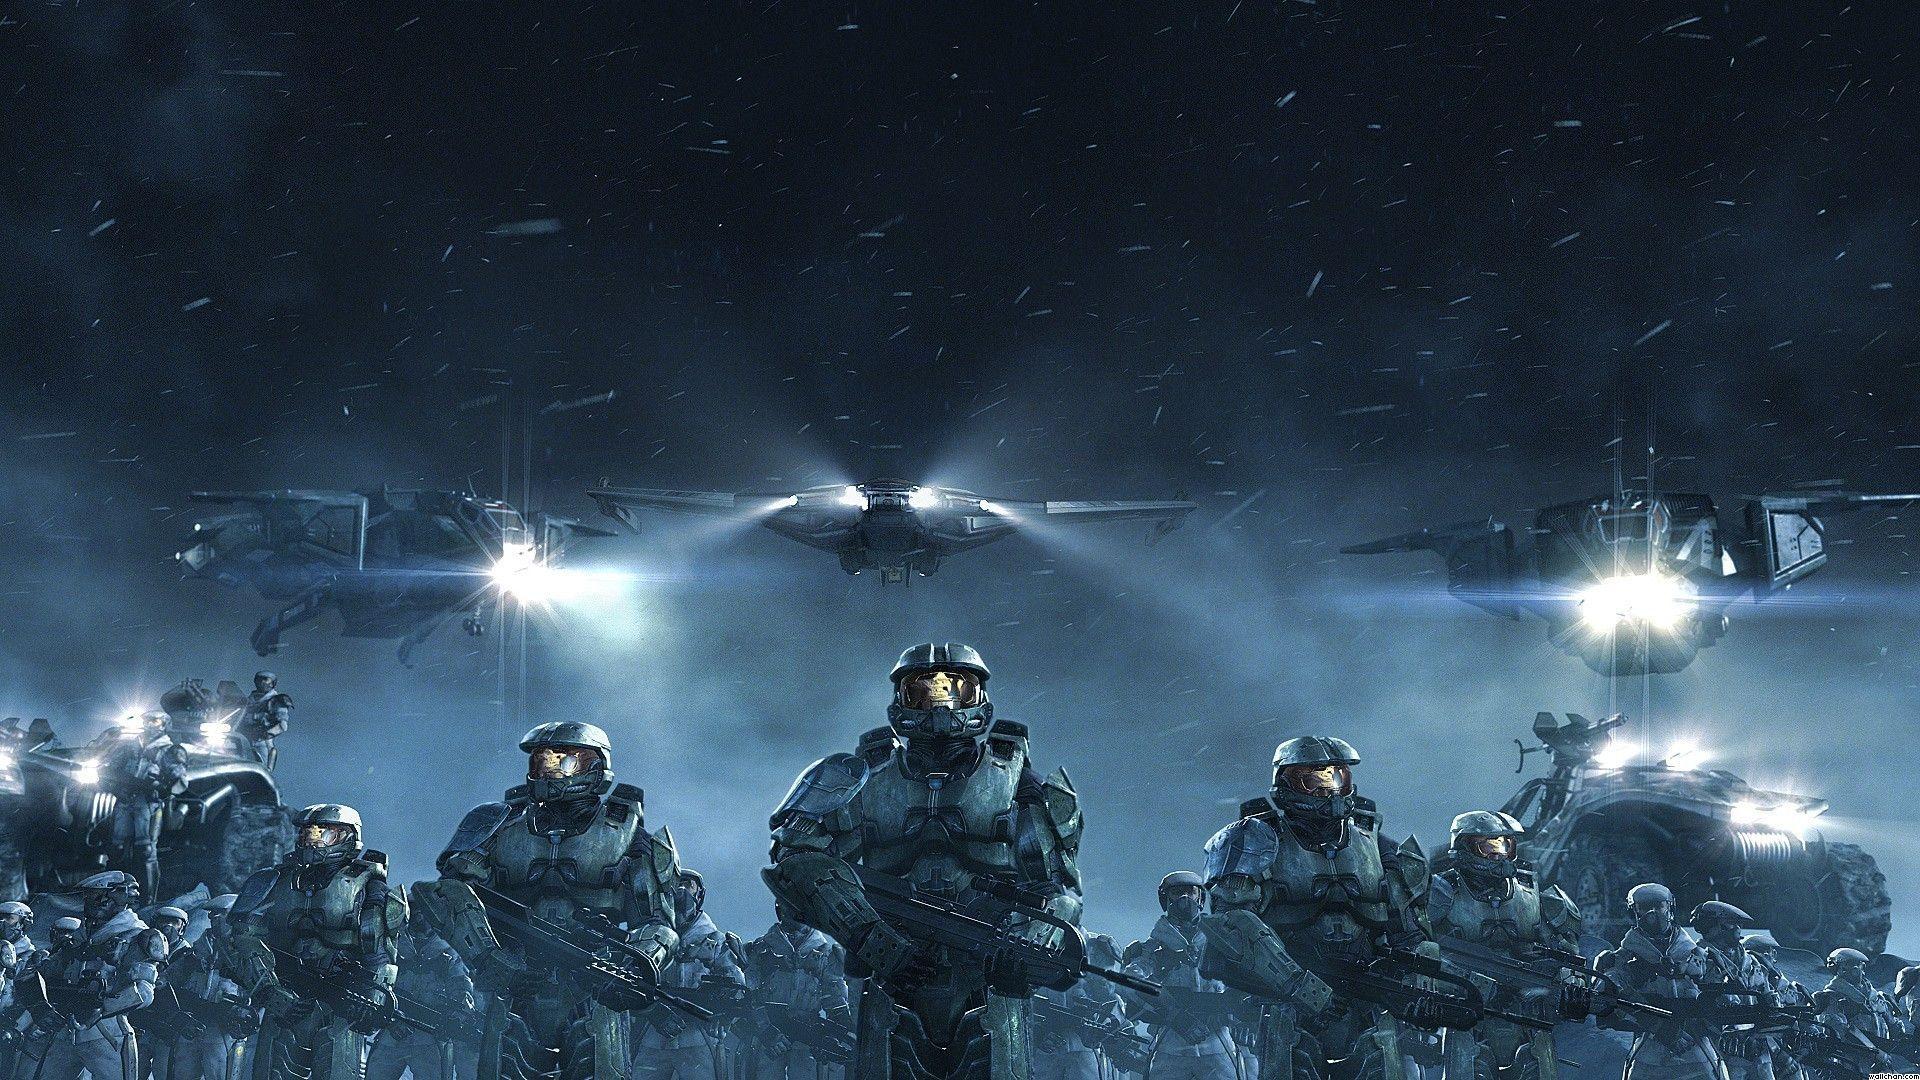 image For > Halo 4 Spartan Wallpaper